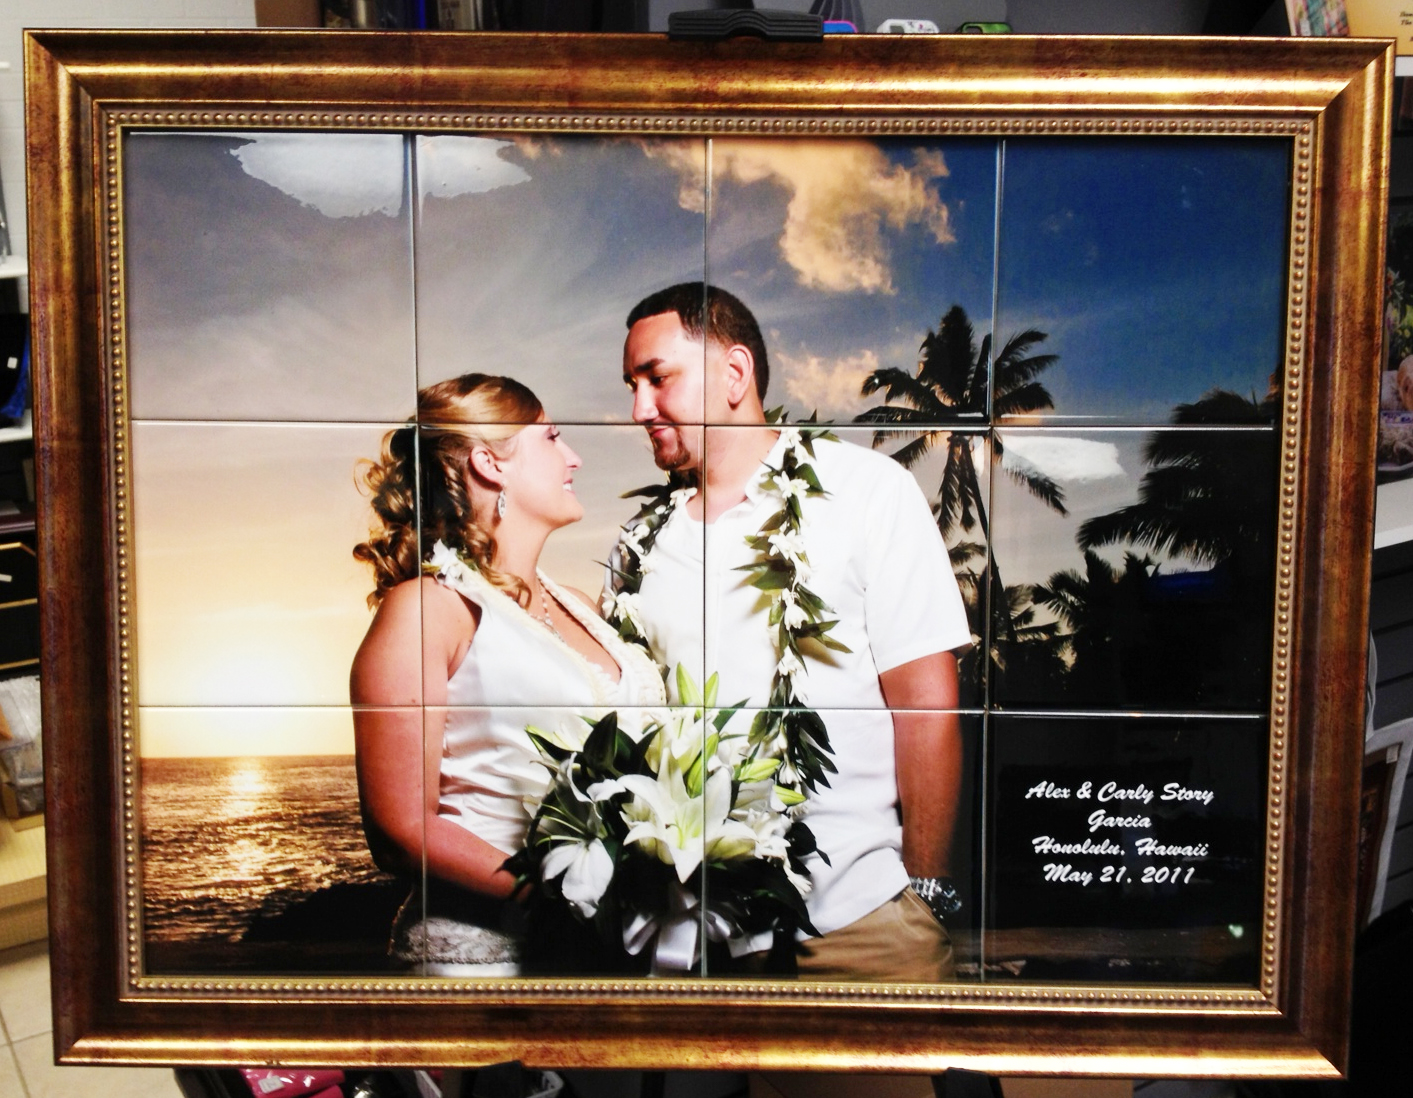 Wedding Tiles Frame made with sublimation printing